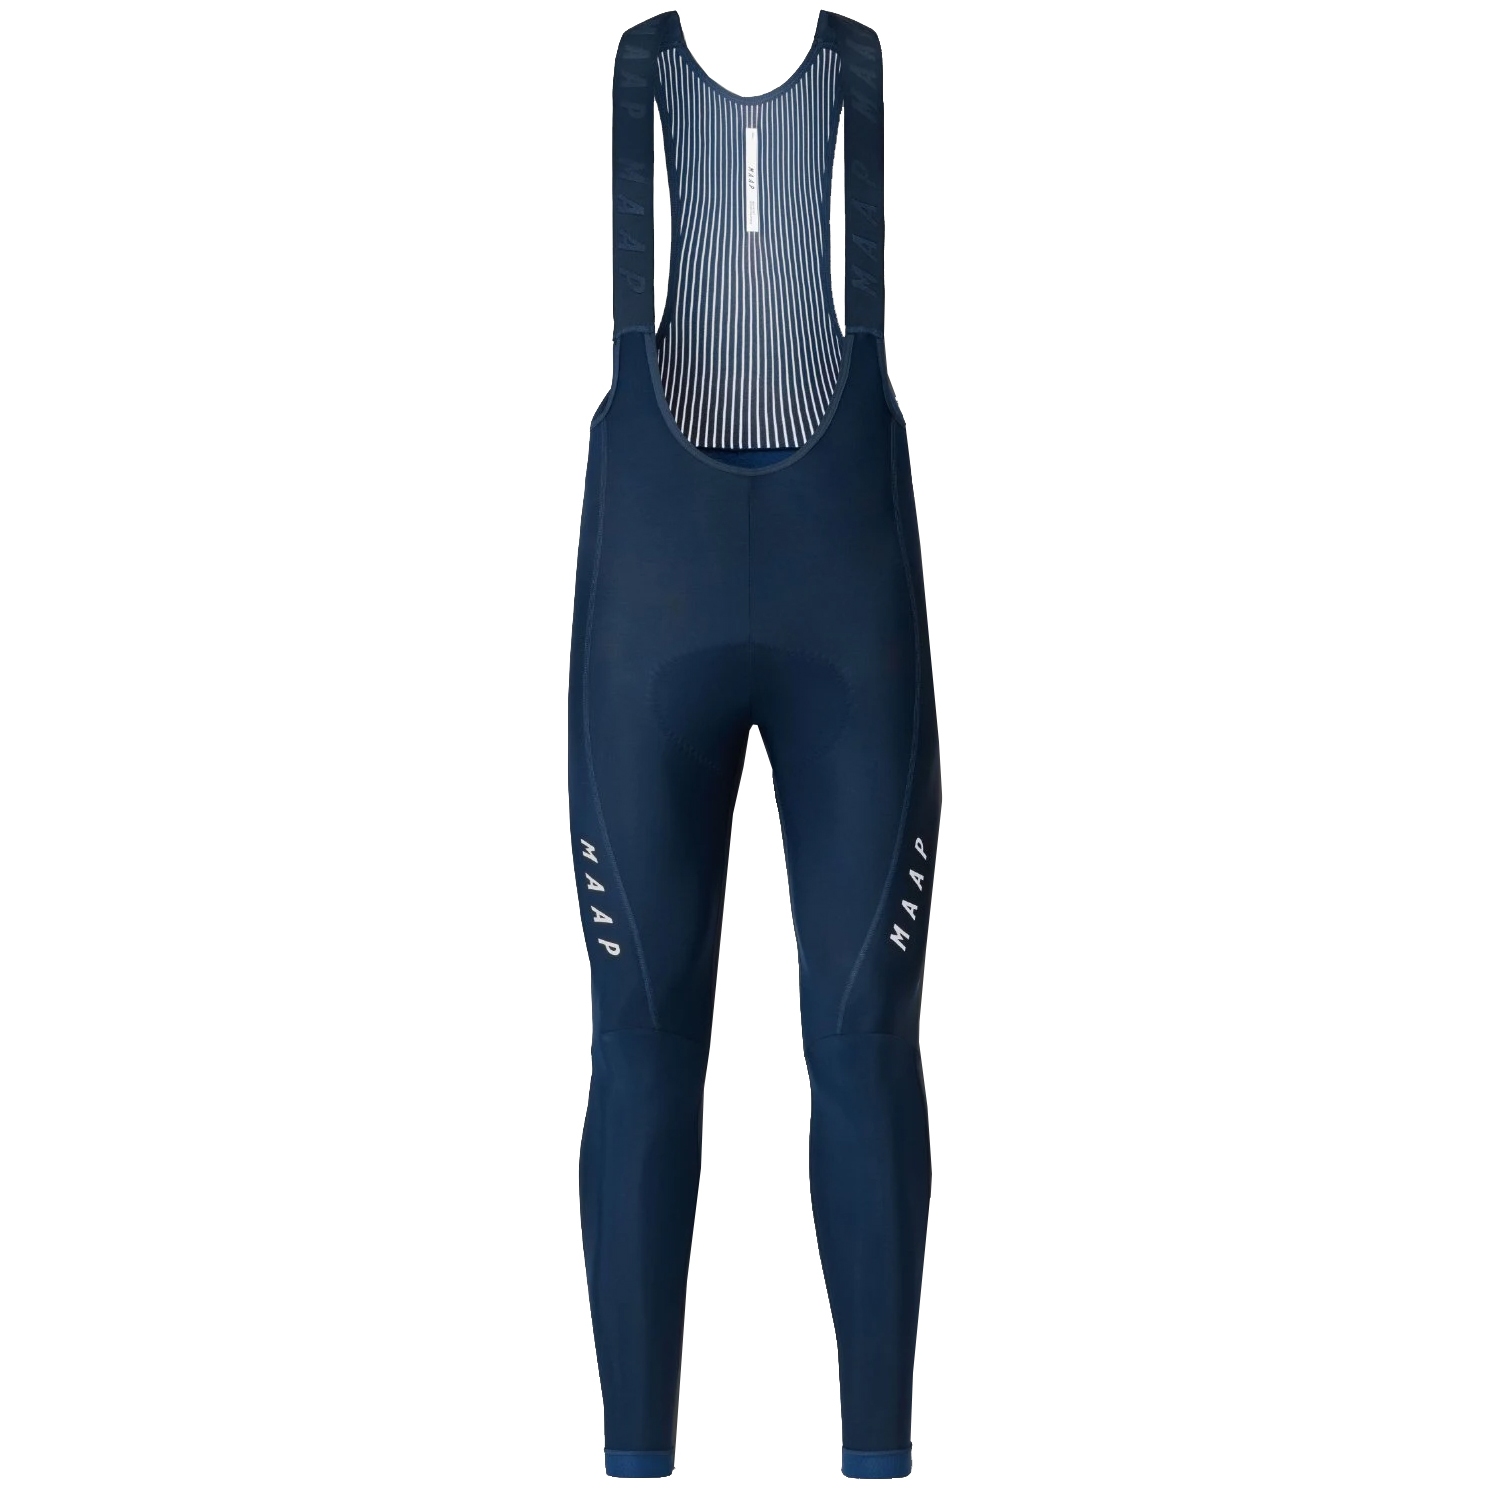 Picture of MAAP Team Evo Thermal Bib Tights - navy